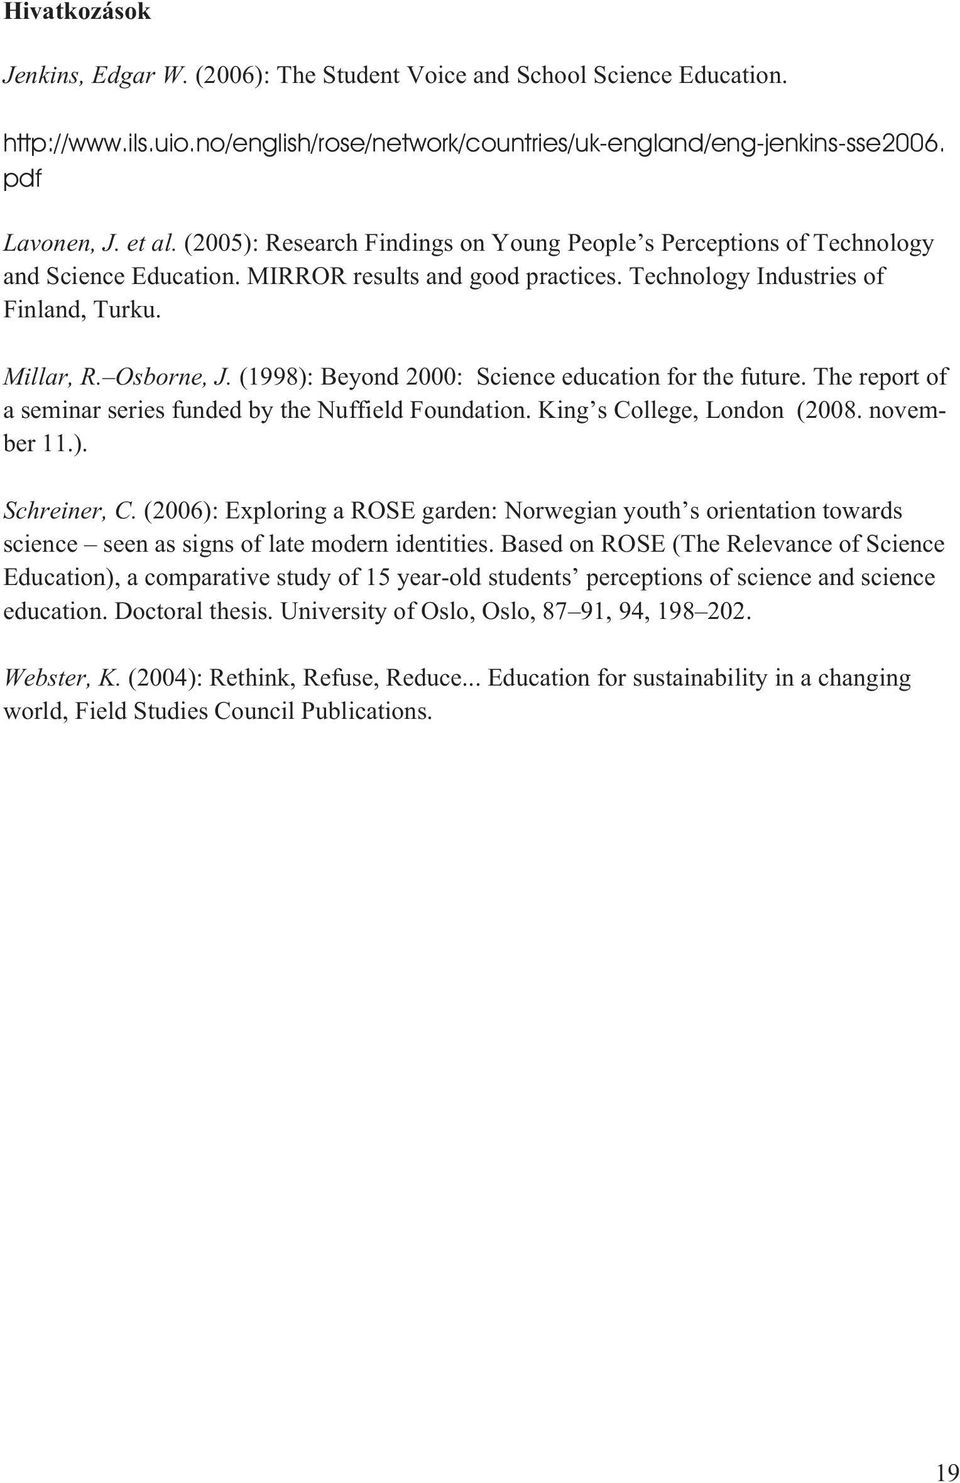 (1998): Beyond 2000: Science education for the future. The report of a seminar series funded by the Nuffield Foundation. King s College, London (2008. november 11.). Schreiner, C.